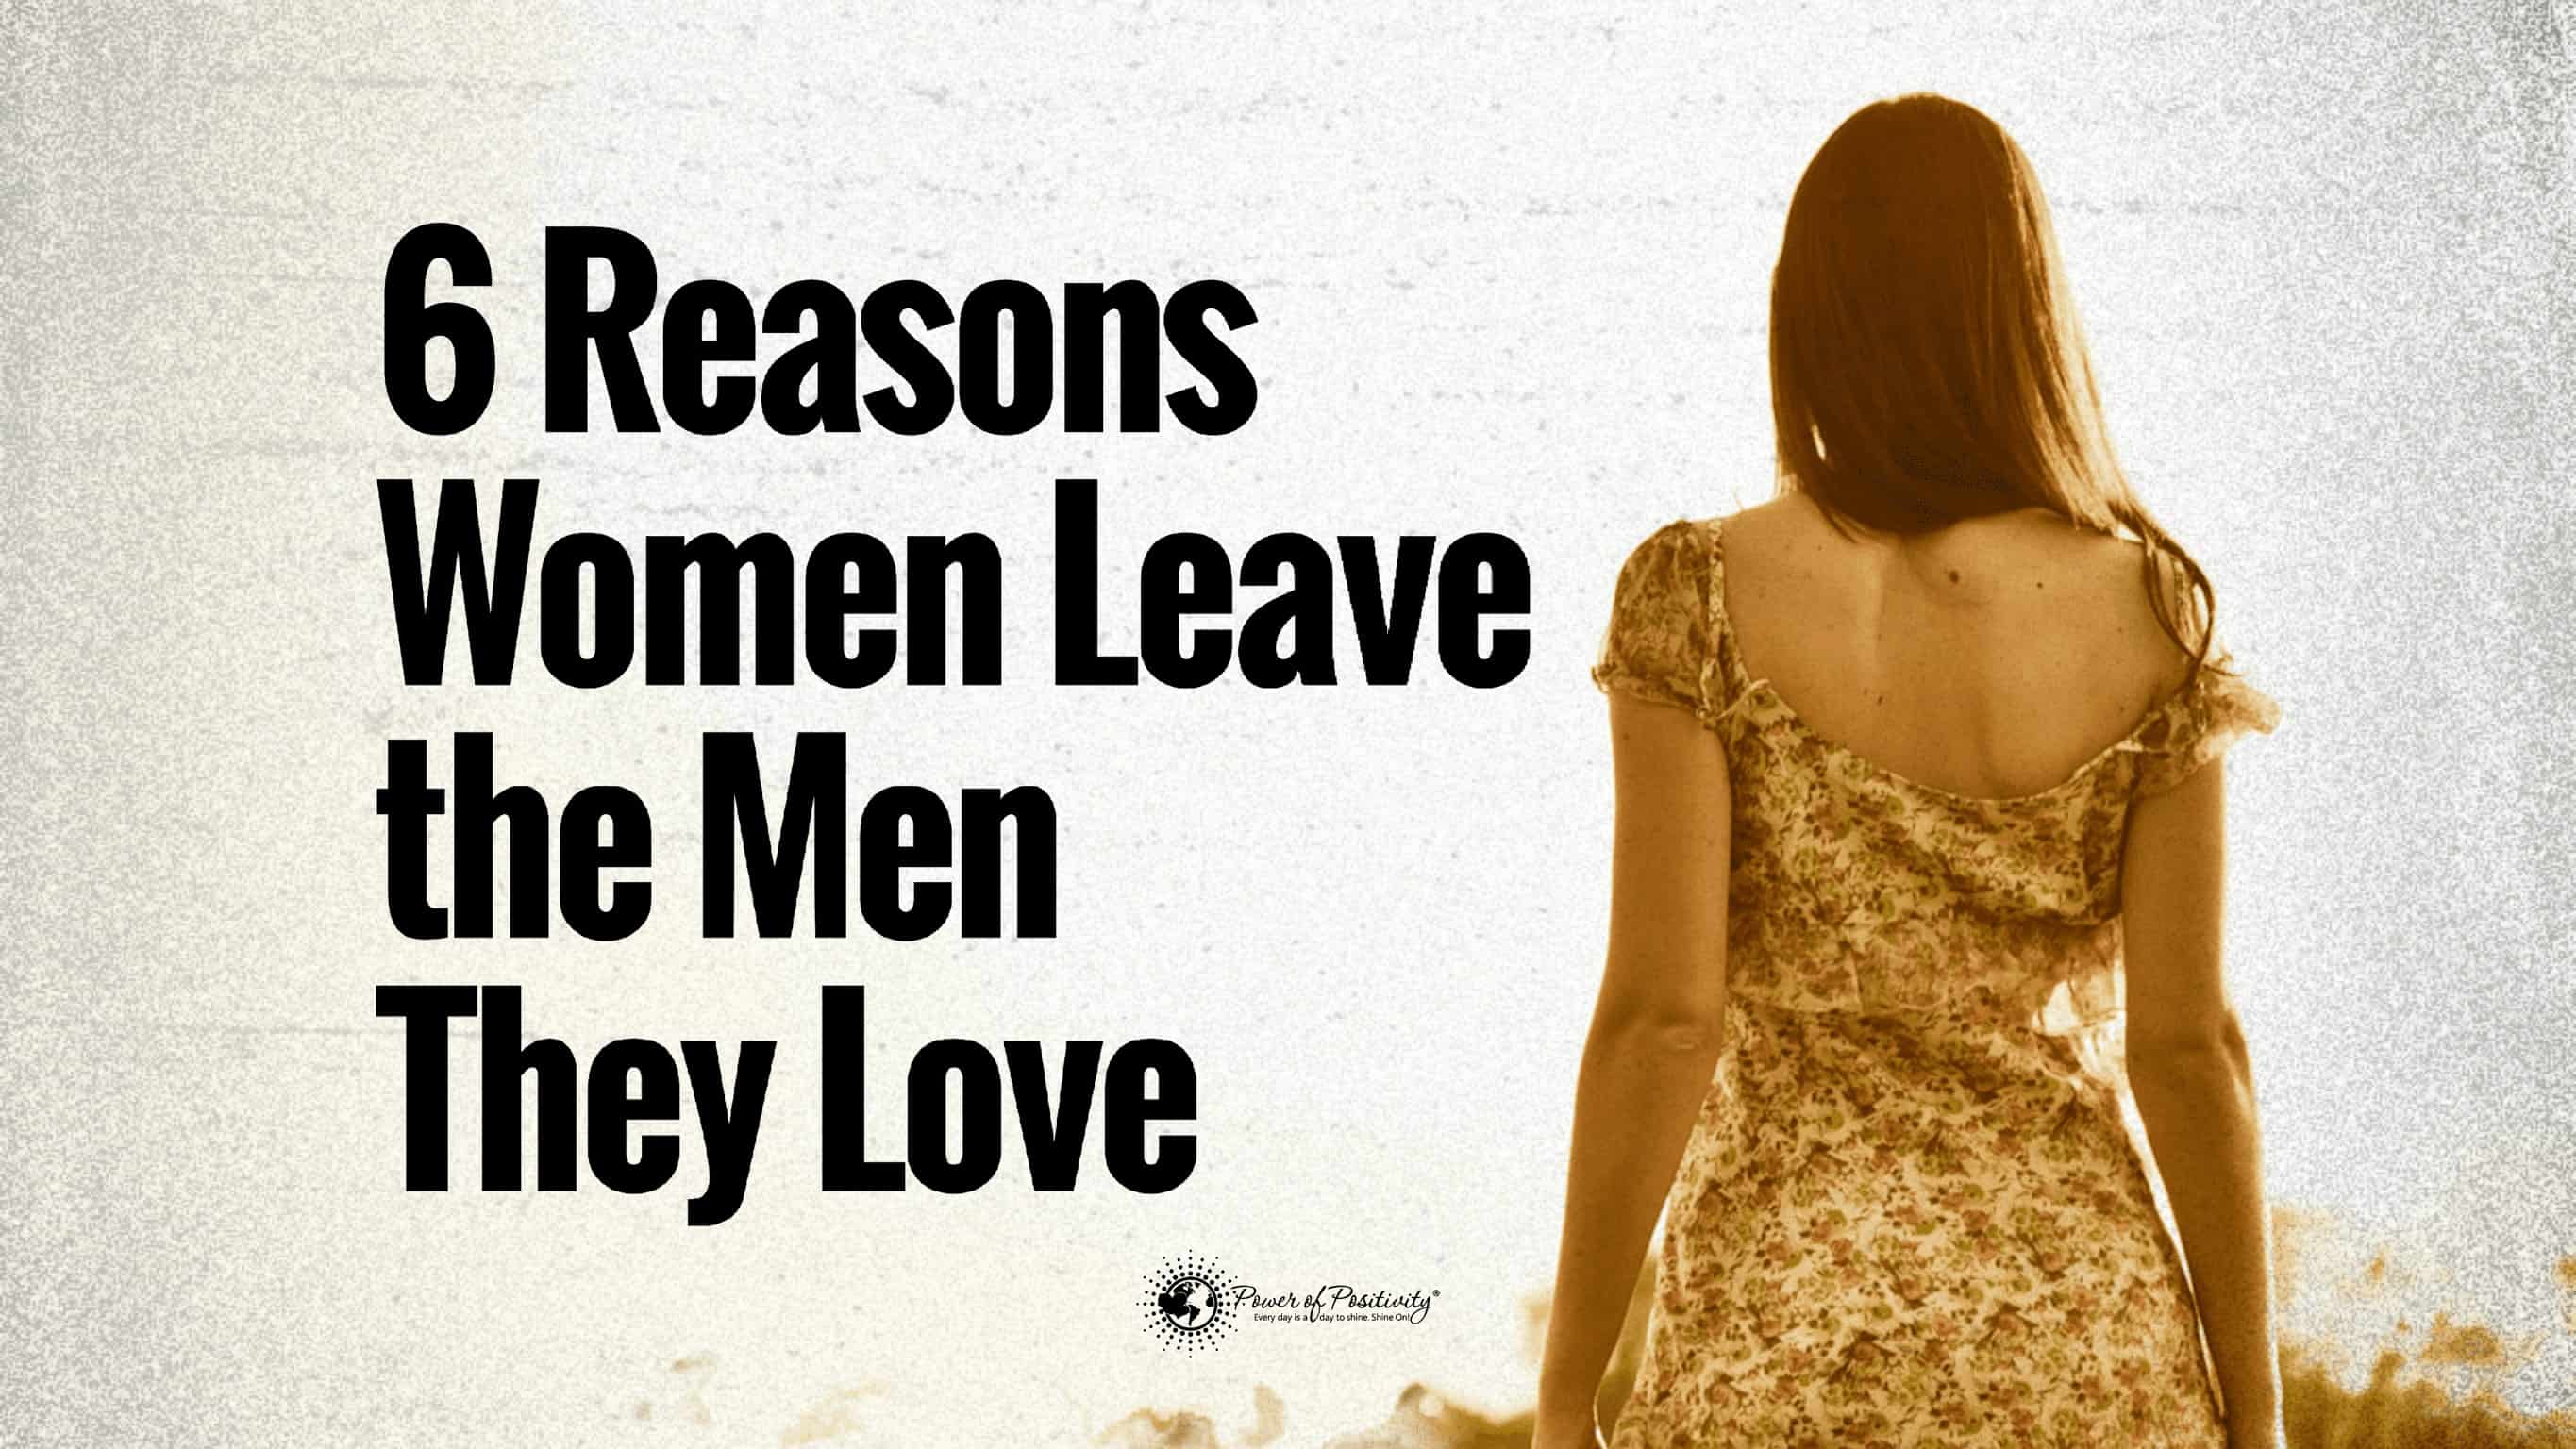 10 Reasons Women Leave the Men They Love